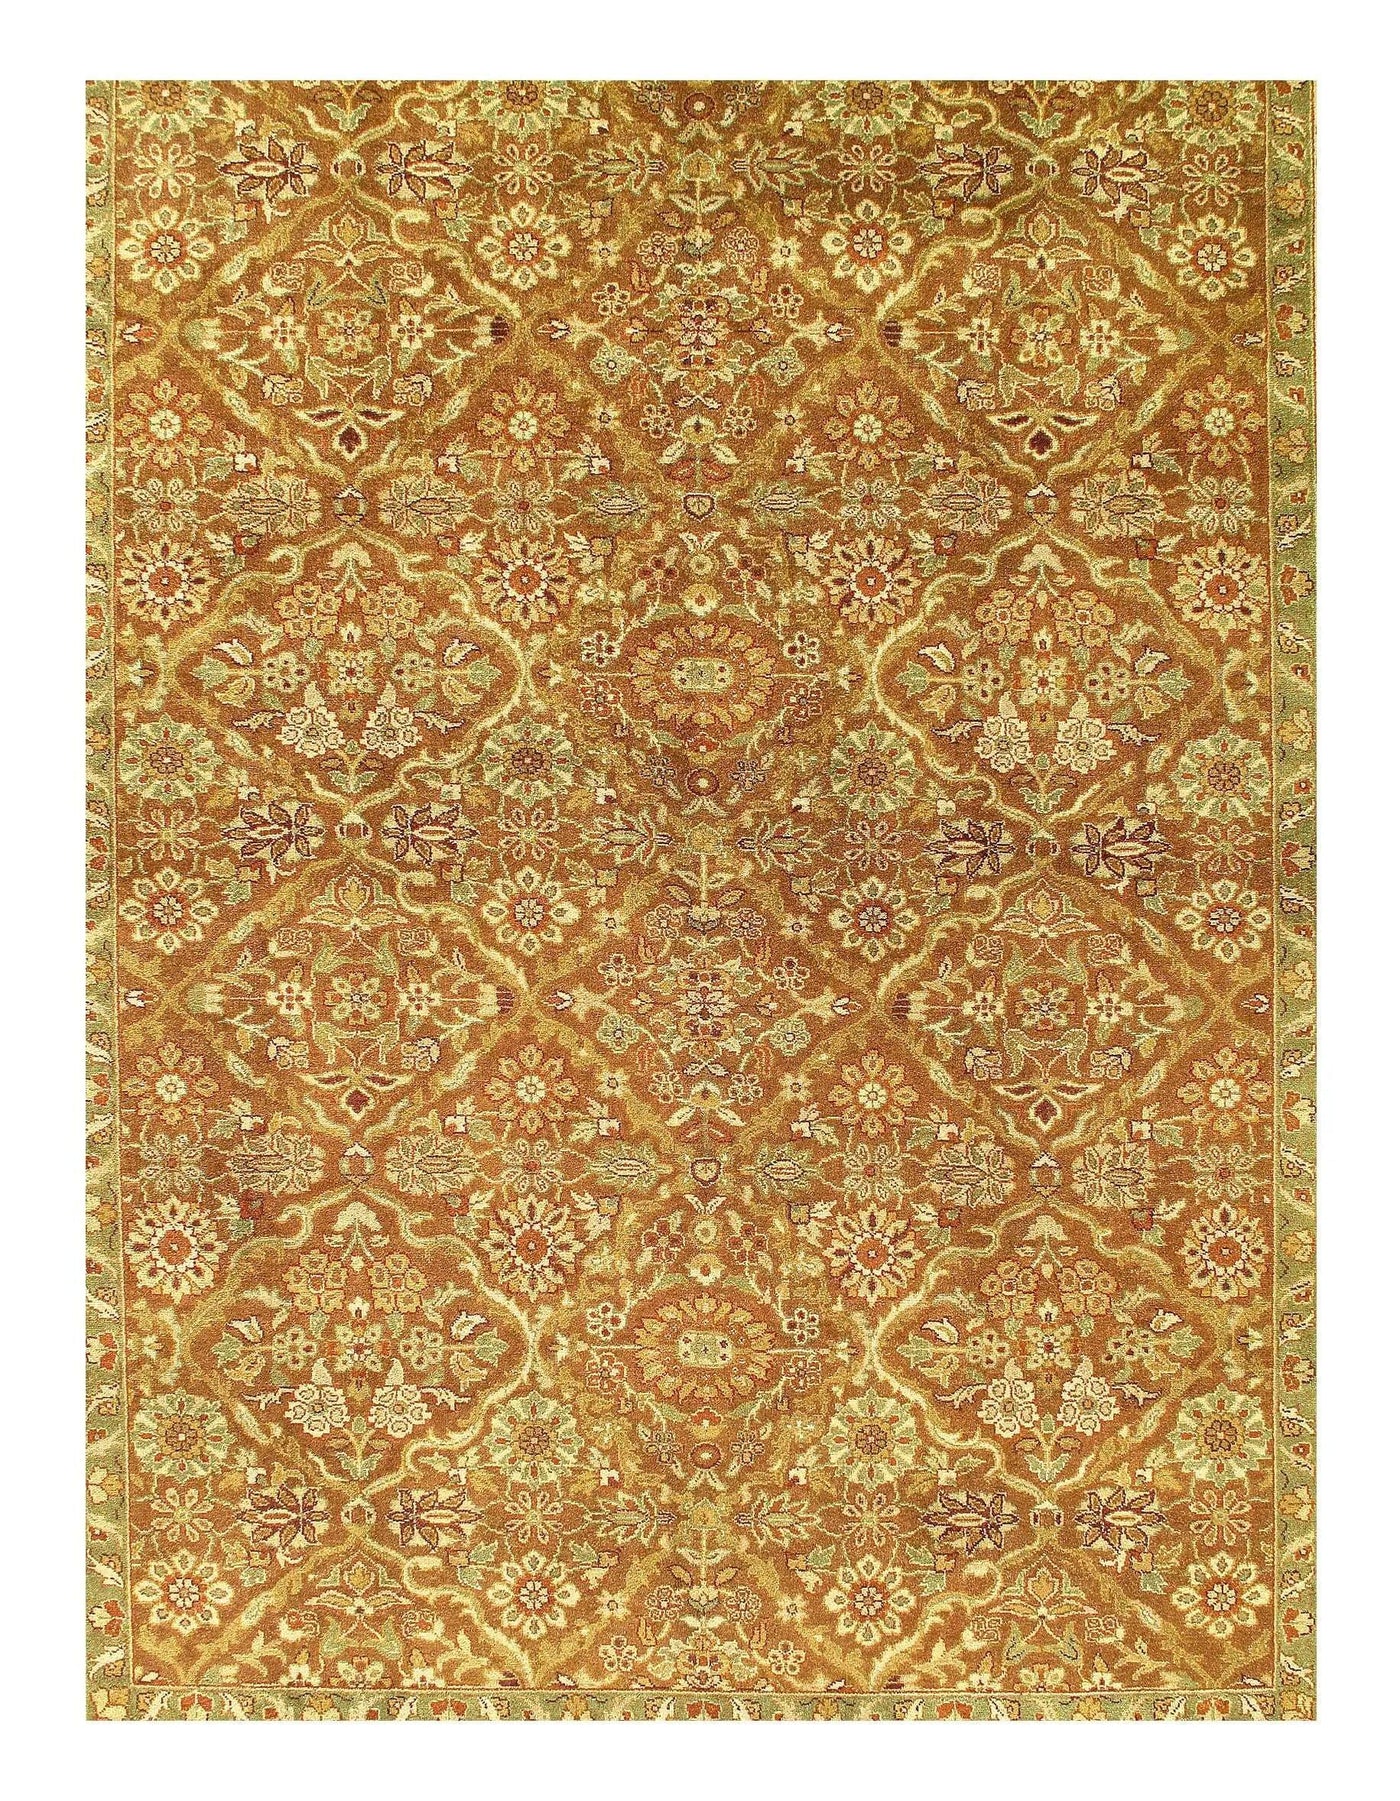 Canvello Agra Hand-Knotted Rug - 9' X 11'9"